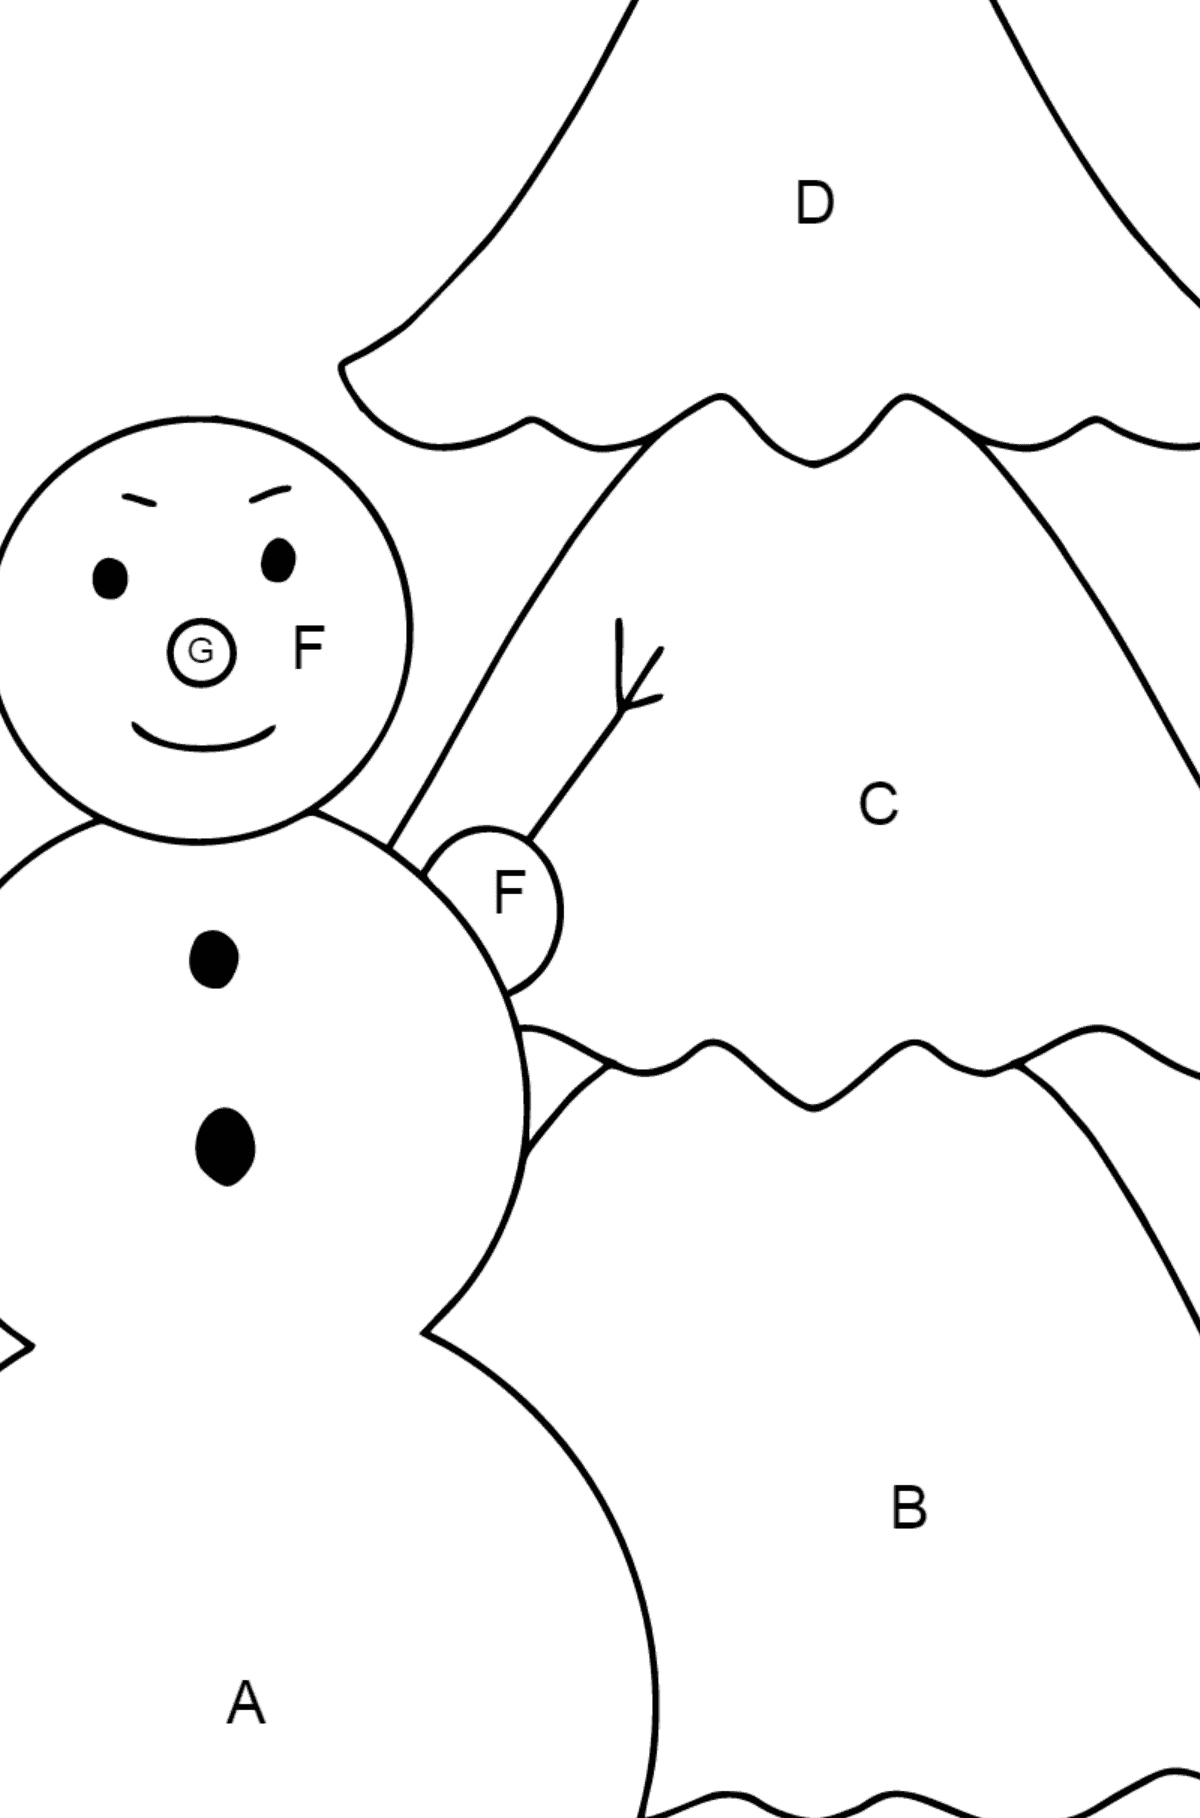 Snowman coloring page for kids - Coloring by Letters for Kids